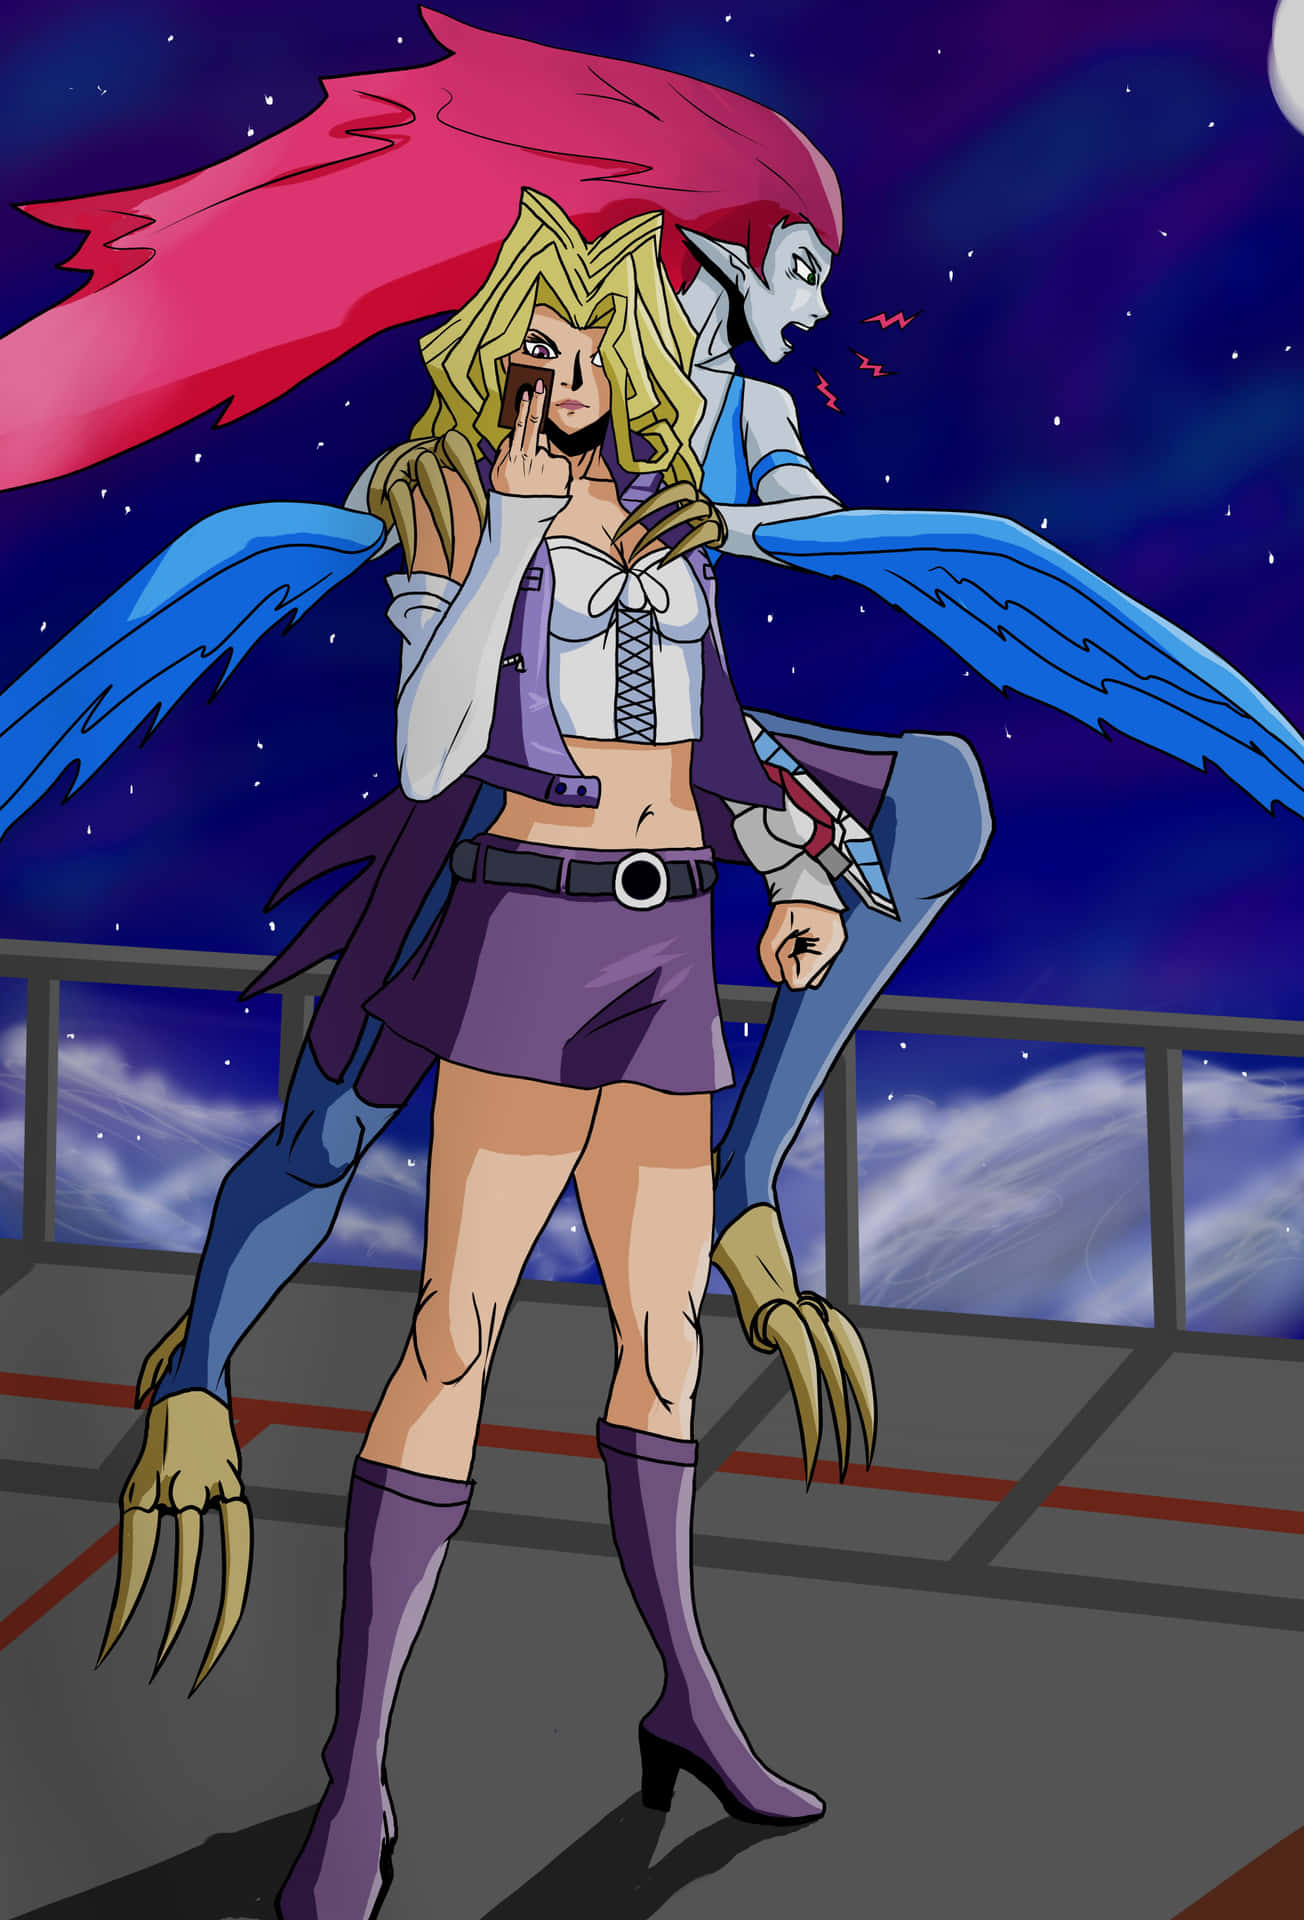 Mai Valentine showcasing style and confidence in Duel Monsters Wallpaper